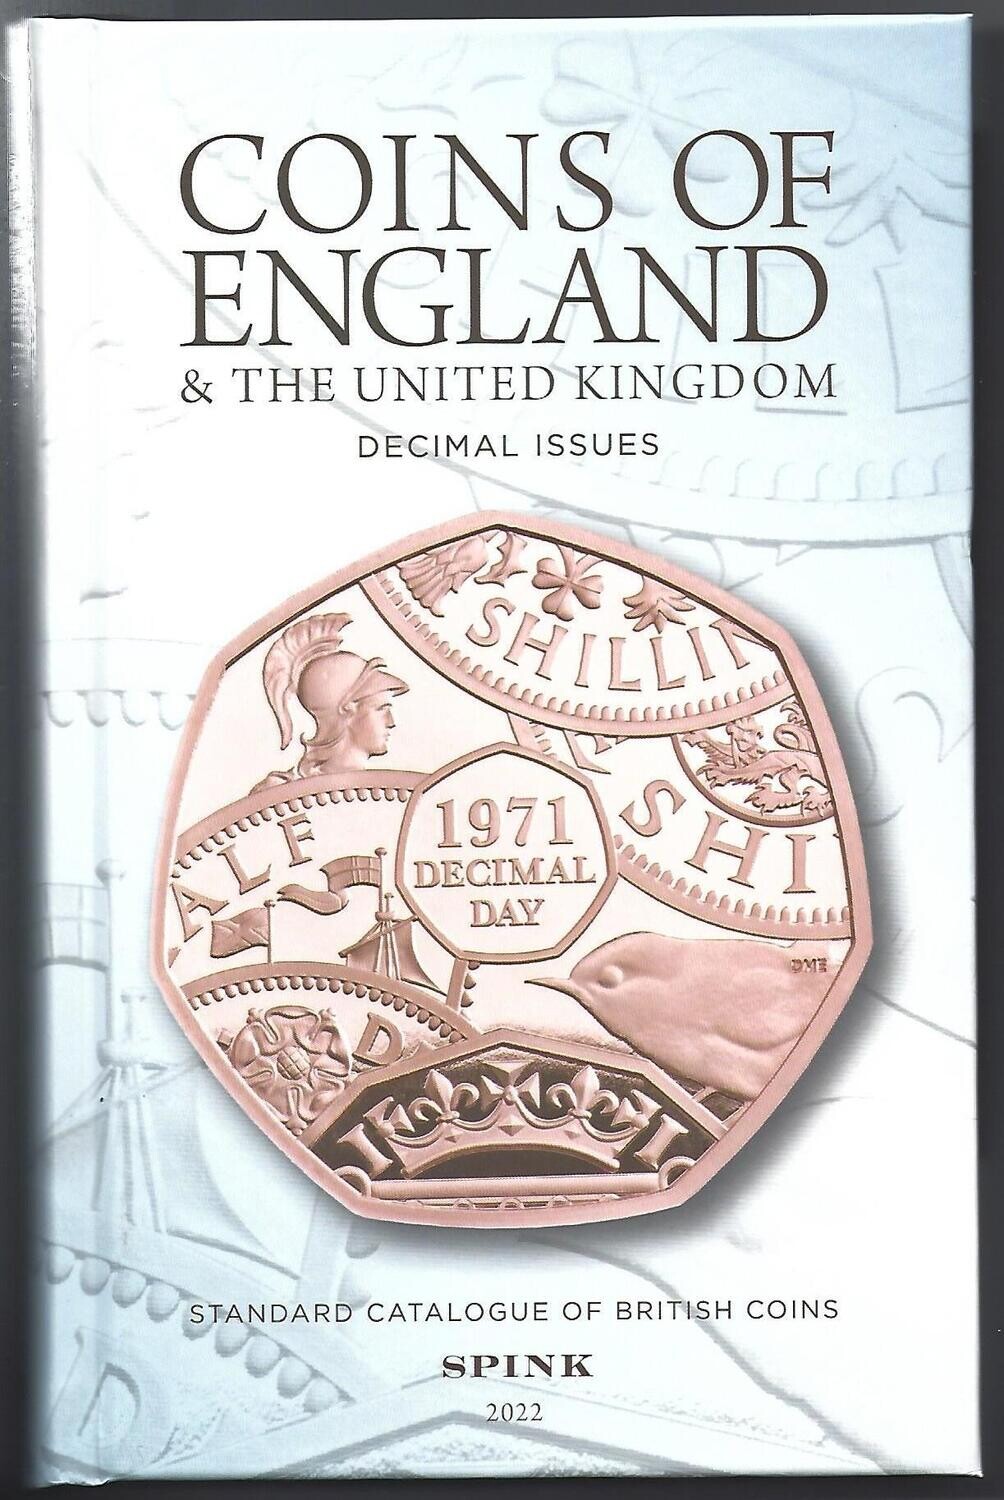 British; Spink & Son, "Coins of England and the United Kingdom - Decimal Issues", 2022.